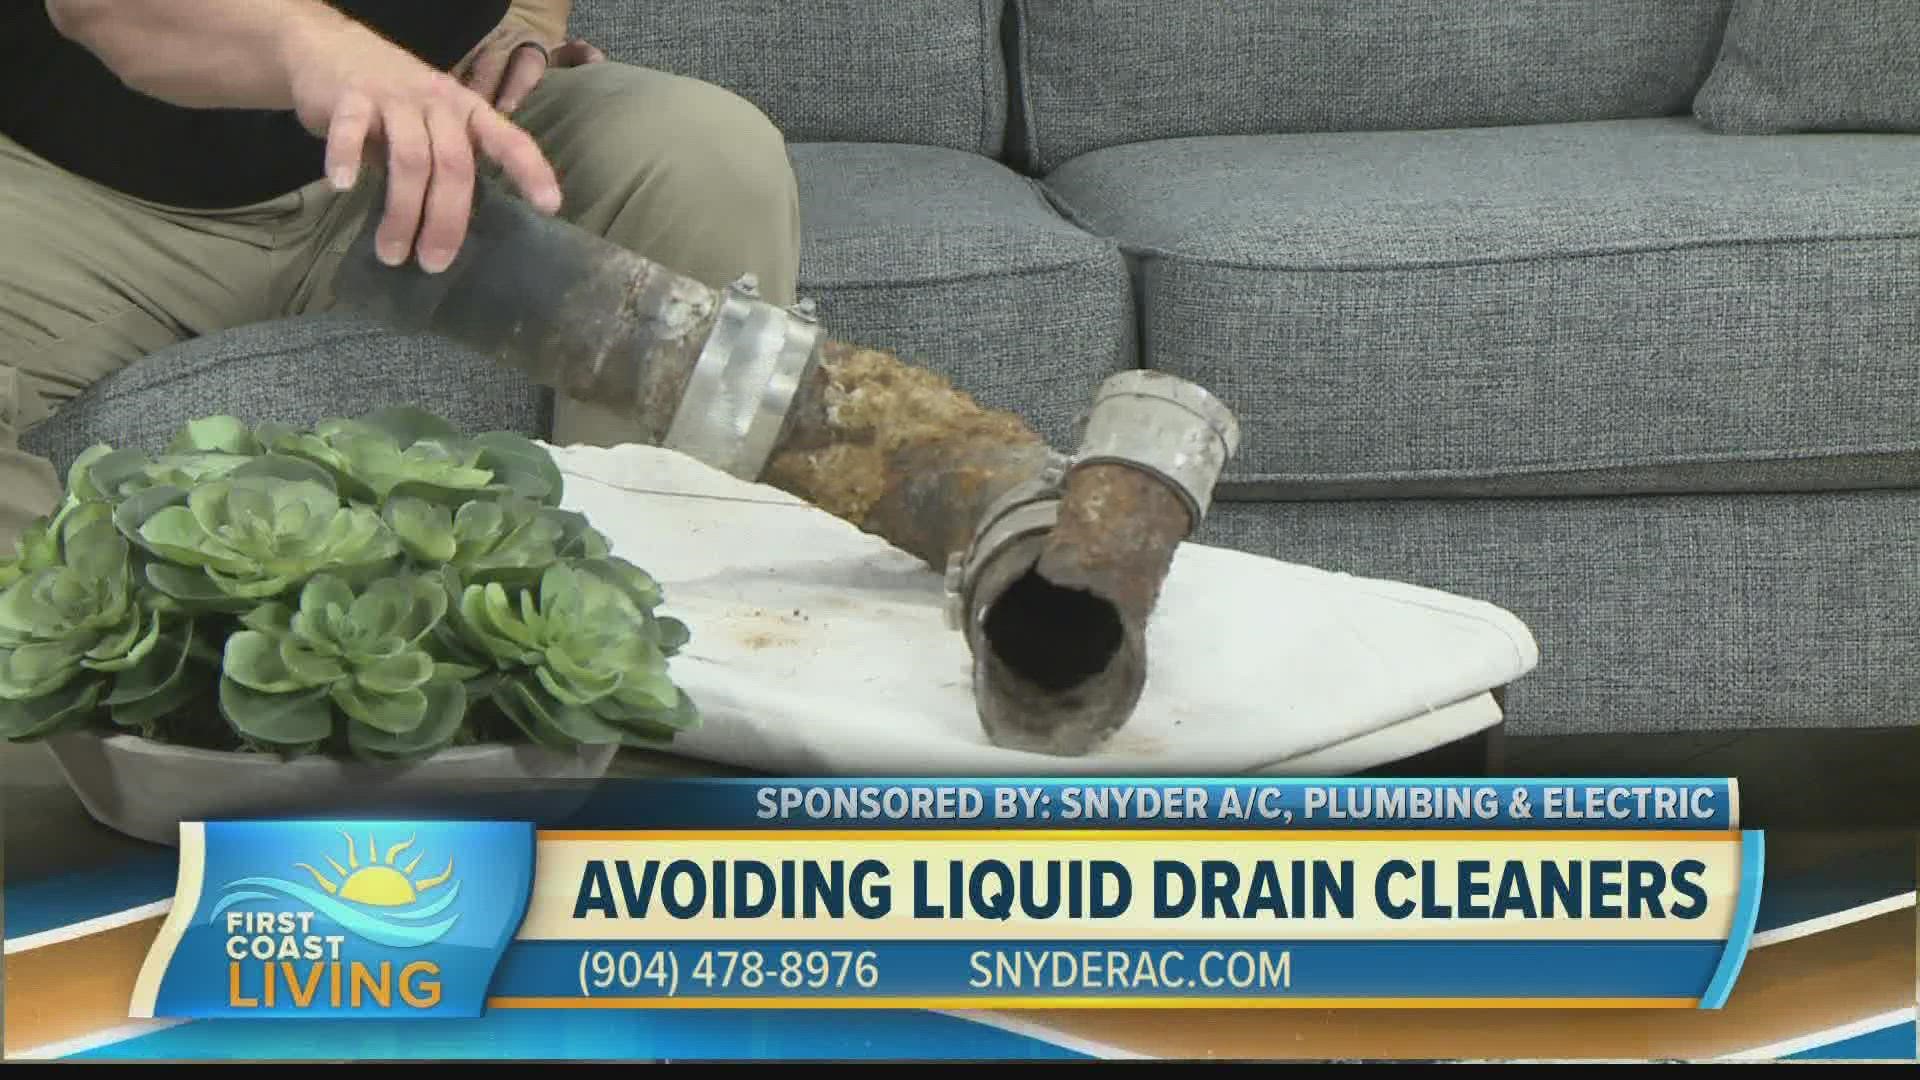 Snyder plumbing technician, Chris Tomberlin discusses the cons of using drain cleaners to clear clogs.